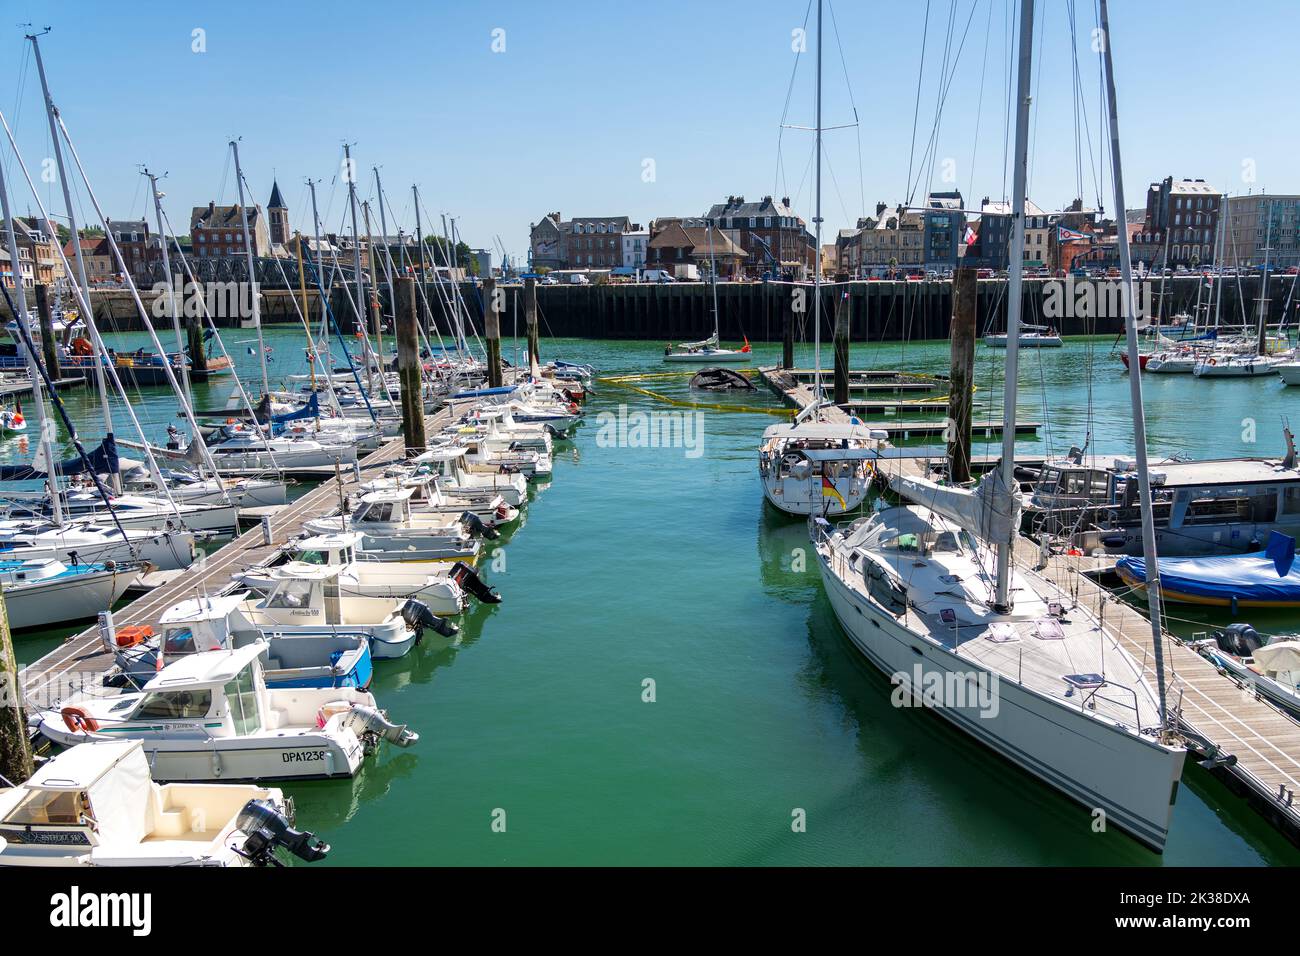 The marina at Dieppe, Normandy Stock Photo